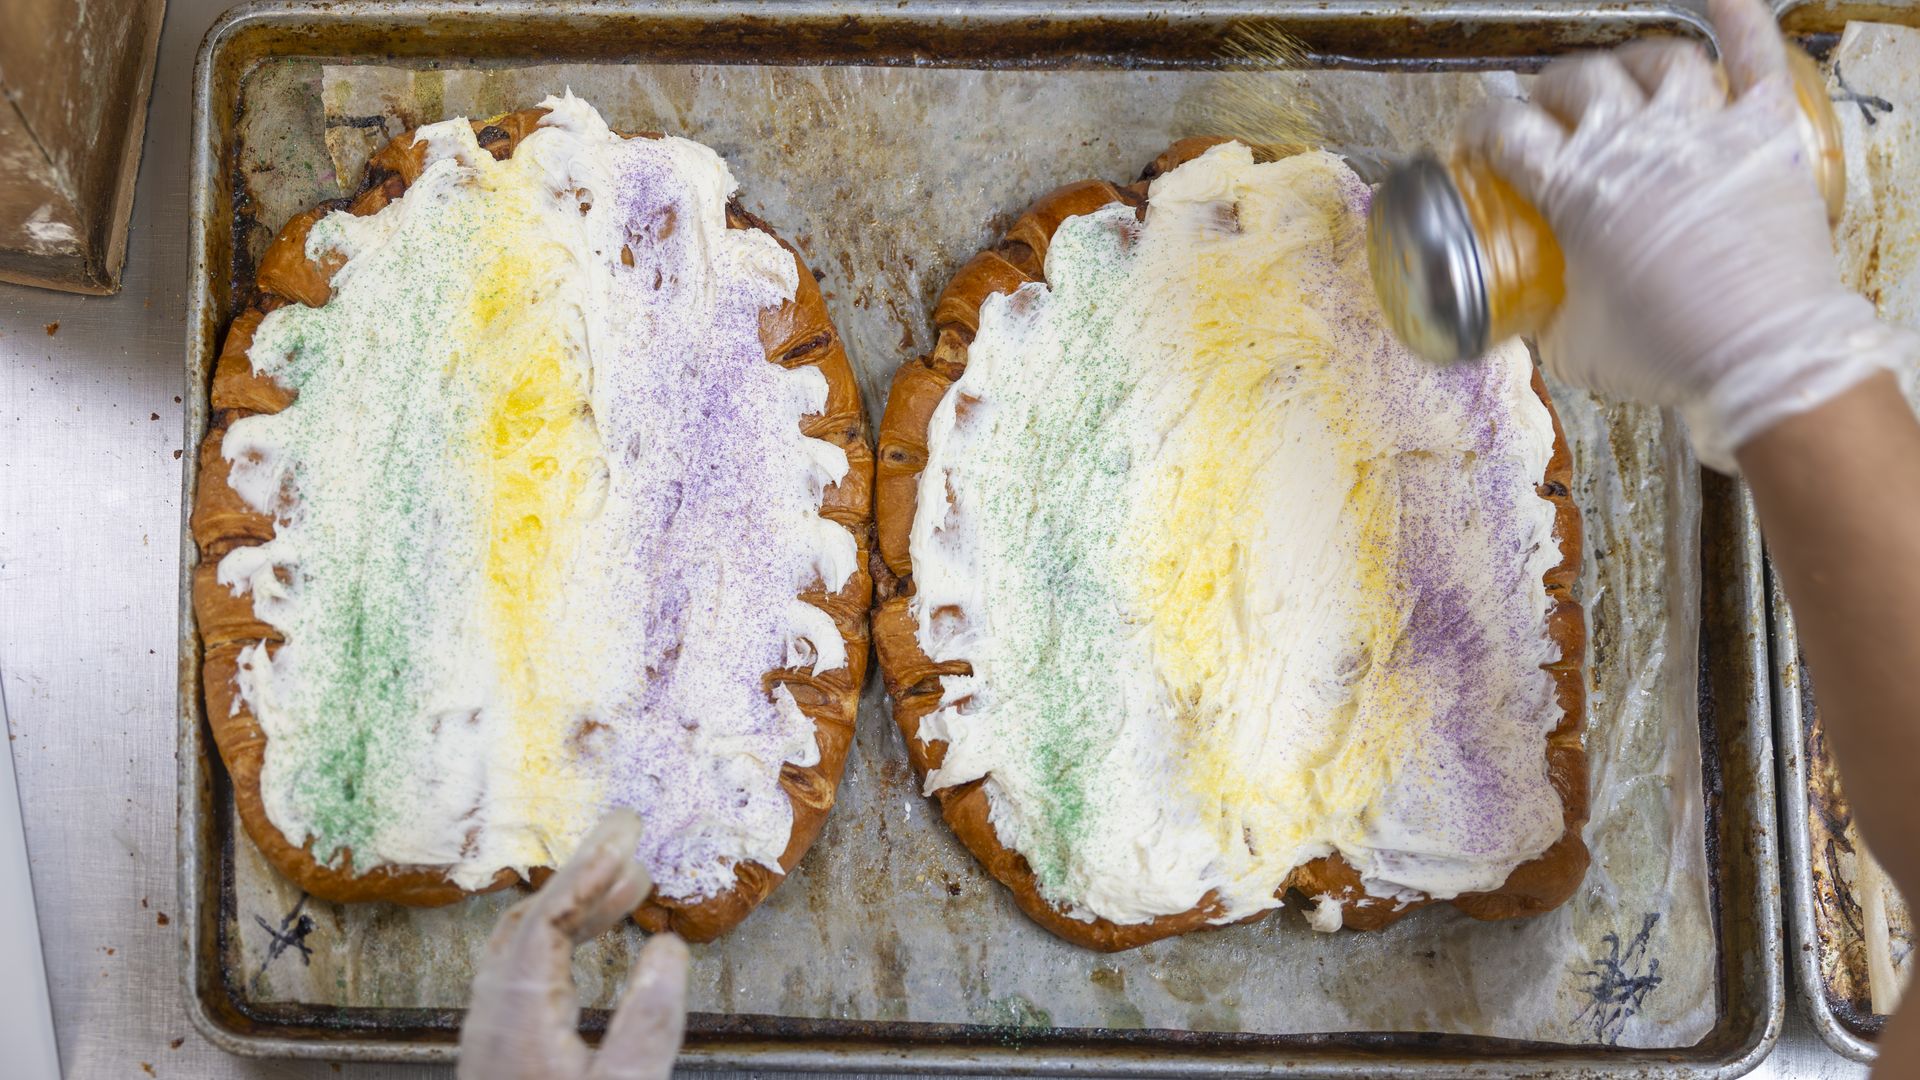 Two king cakes with green, yellow and purple sprinkles.